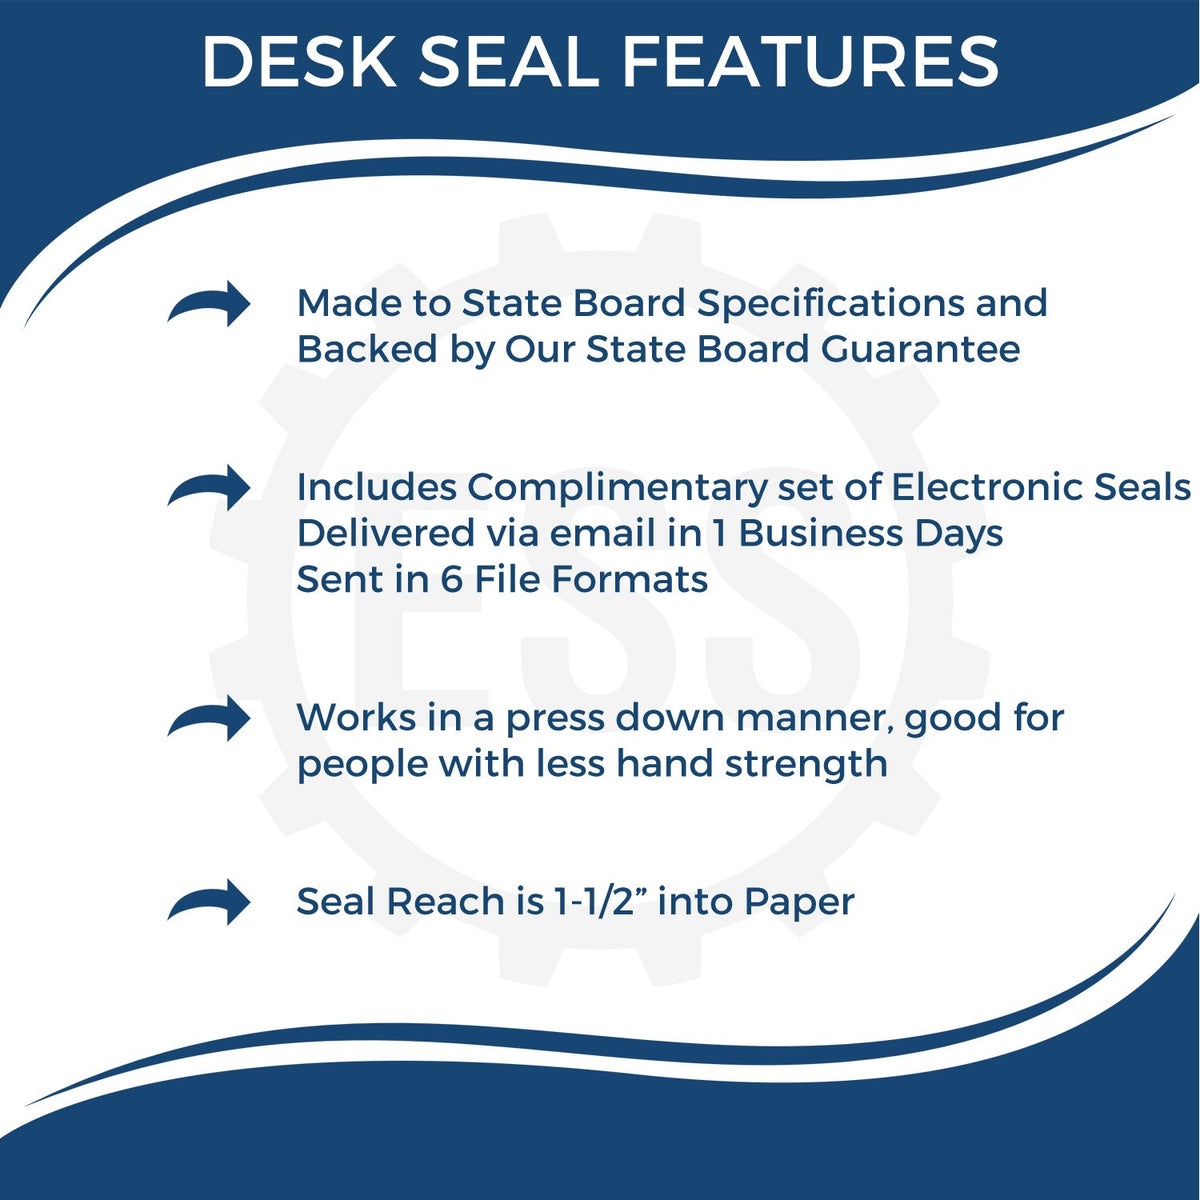 A picture of an infographic highlighting the selling points for the Idaho Geologist Desk Seal